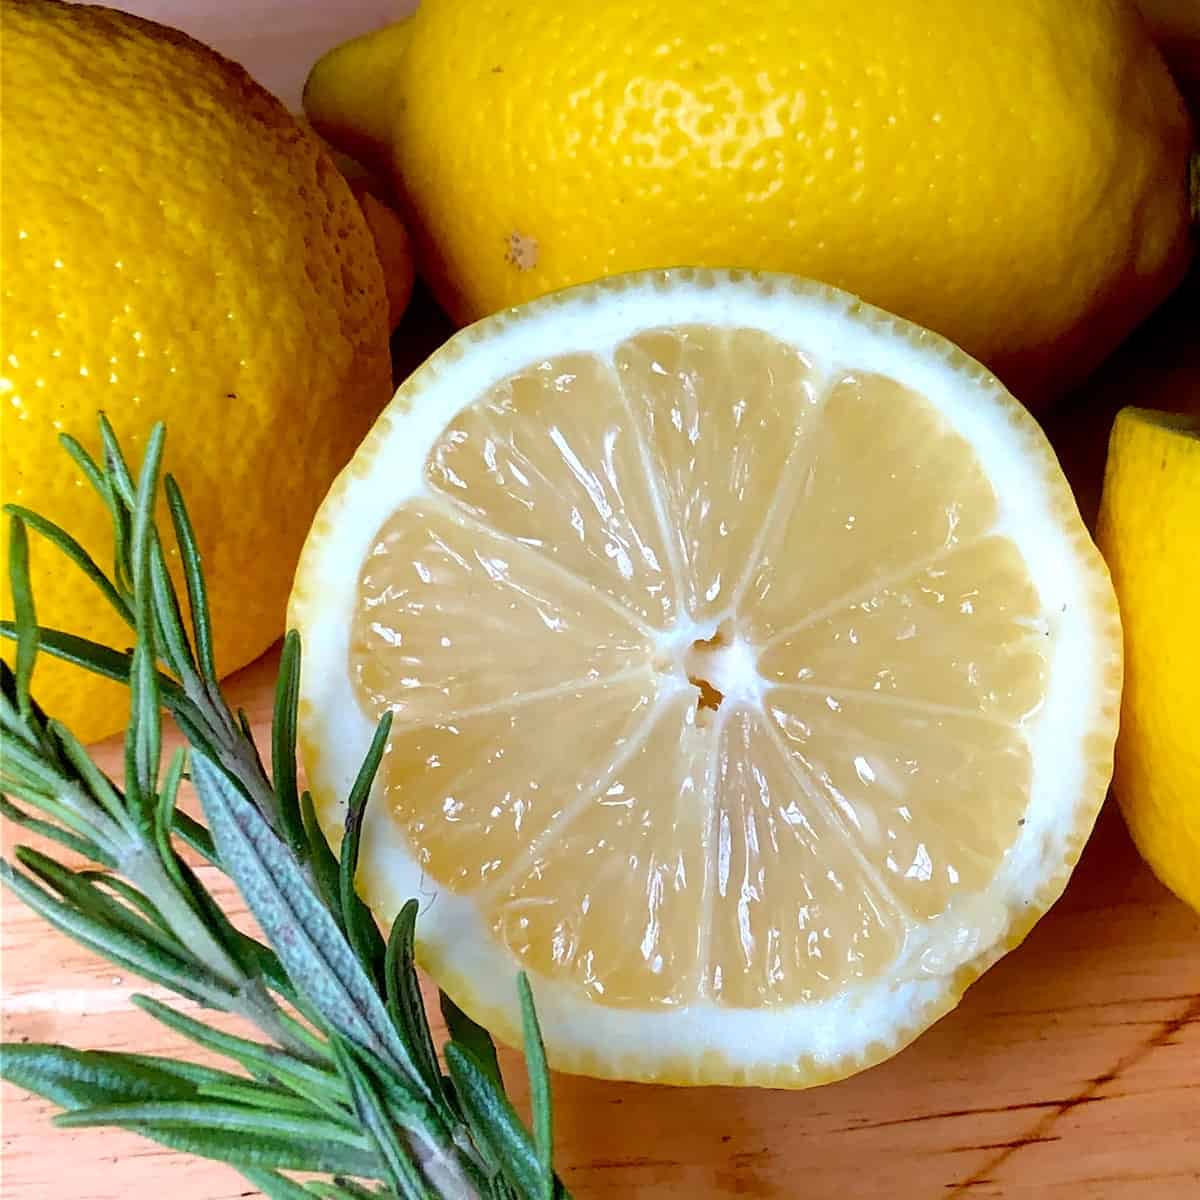 halved lemon and sprig of fresh rosemary on a wooden cutting board. photo credit mary khaliqi.